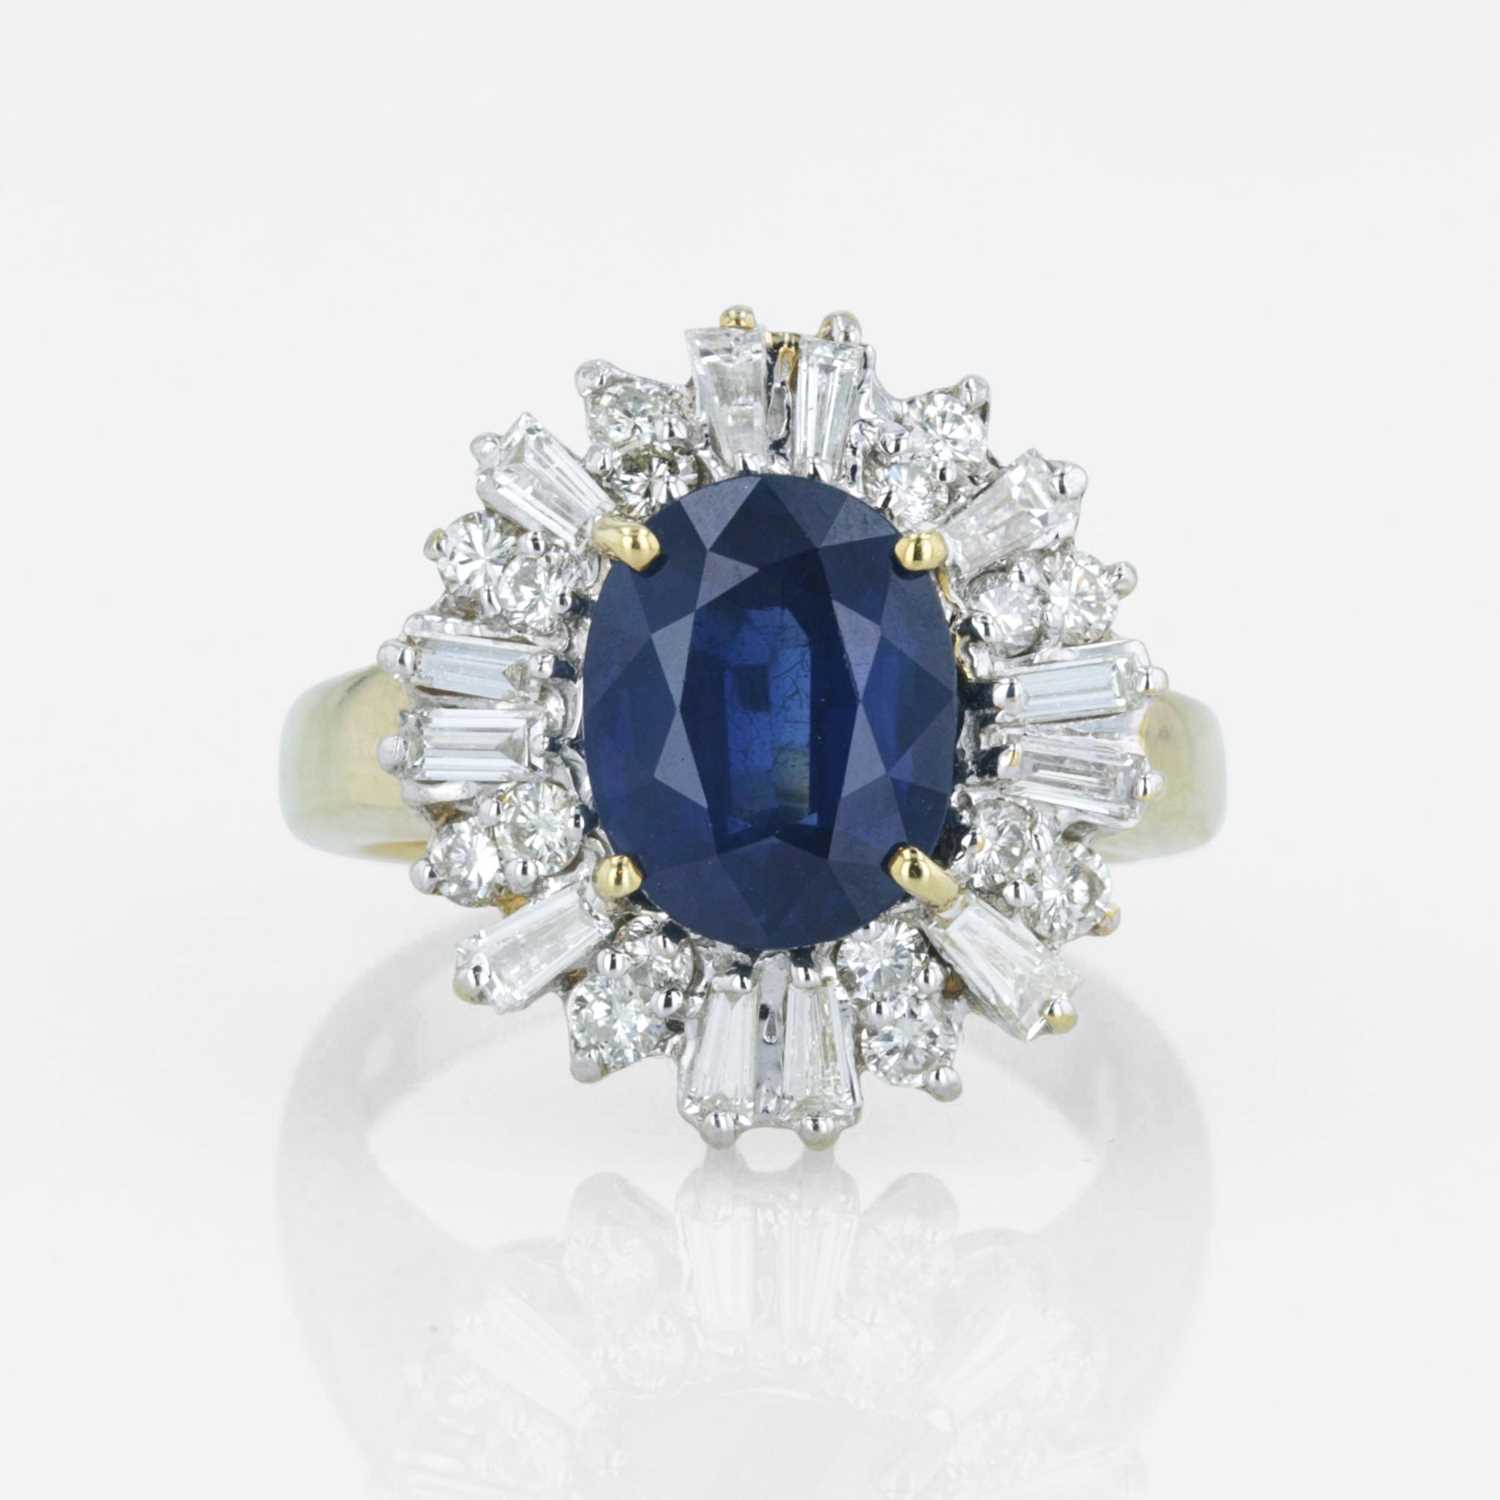 Lot 6 - An 18K yellow gold, sapphire, and diamond ring